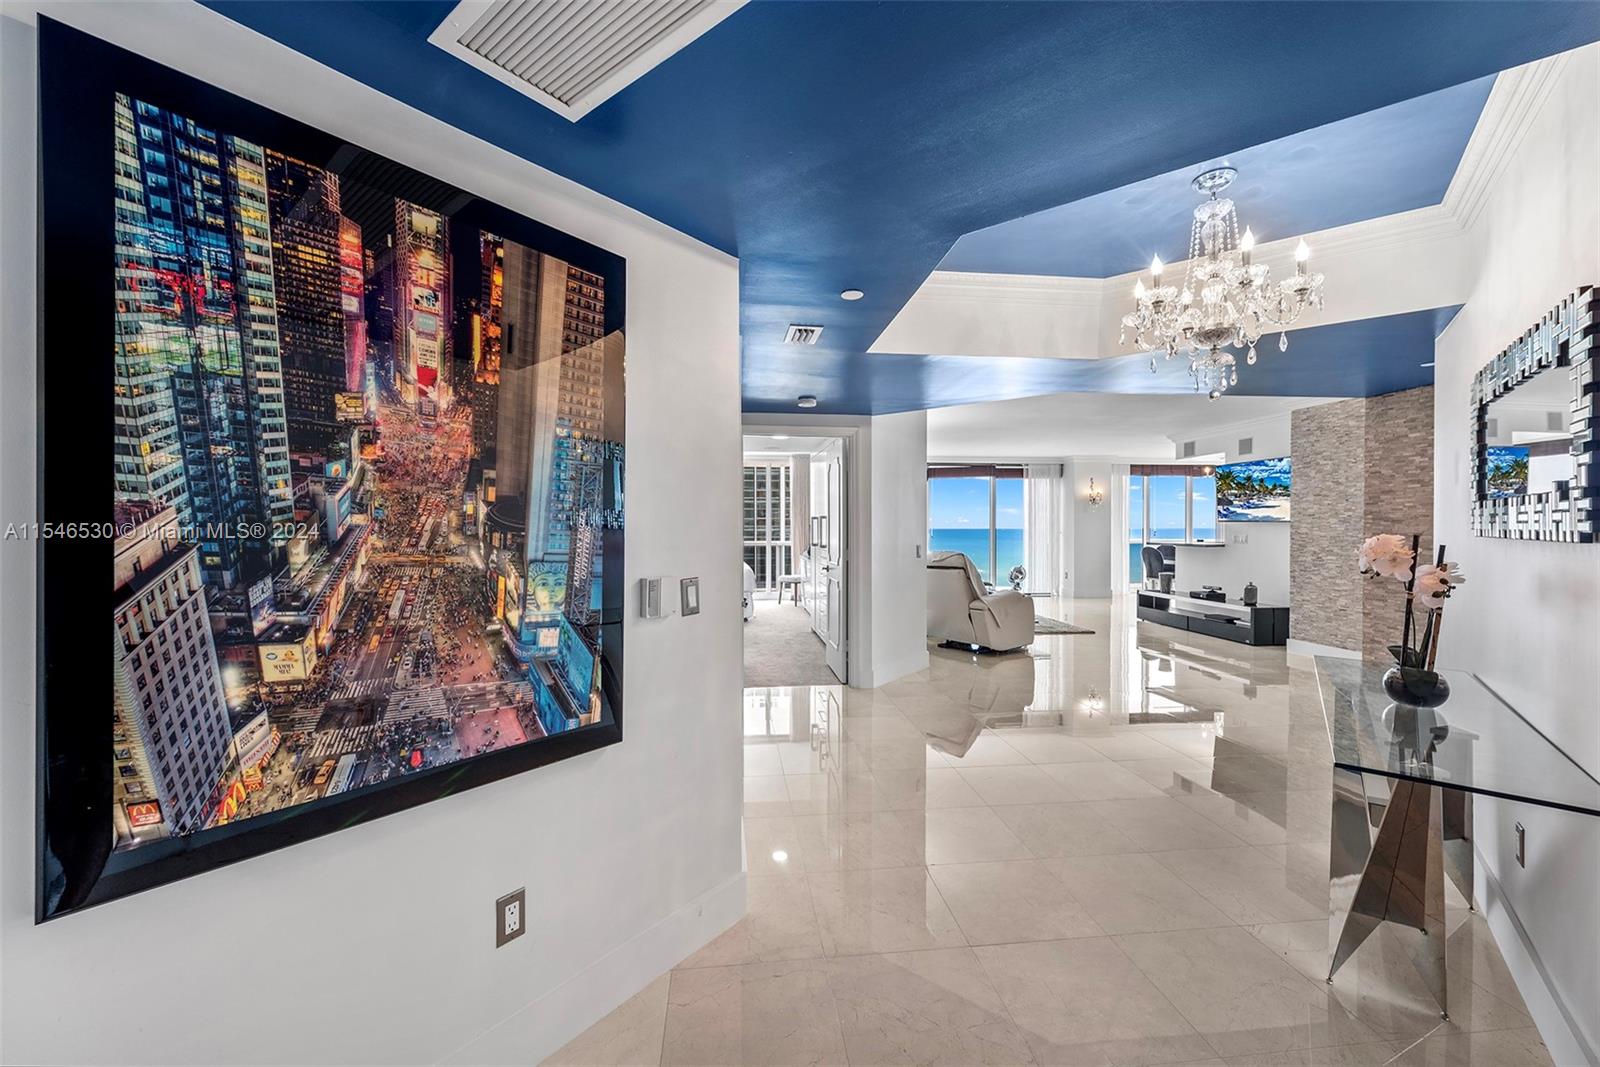 Lowest priced 3-bedroom corner unit in the Blue and Green Diamond! This unit has fantastic views of the ocean and located in one of Miami's best locations. Beautiful bright space with a spacious open kitchen, marble flooring, floor to ceiling windows and access to superb amenities. Don't miss this opportunity. GREAT VALUE.